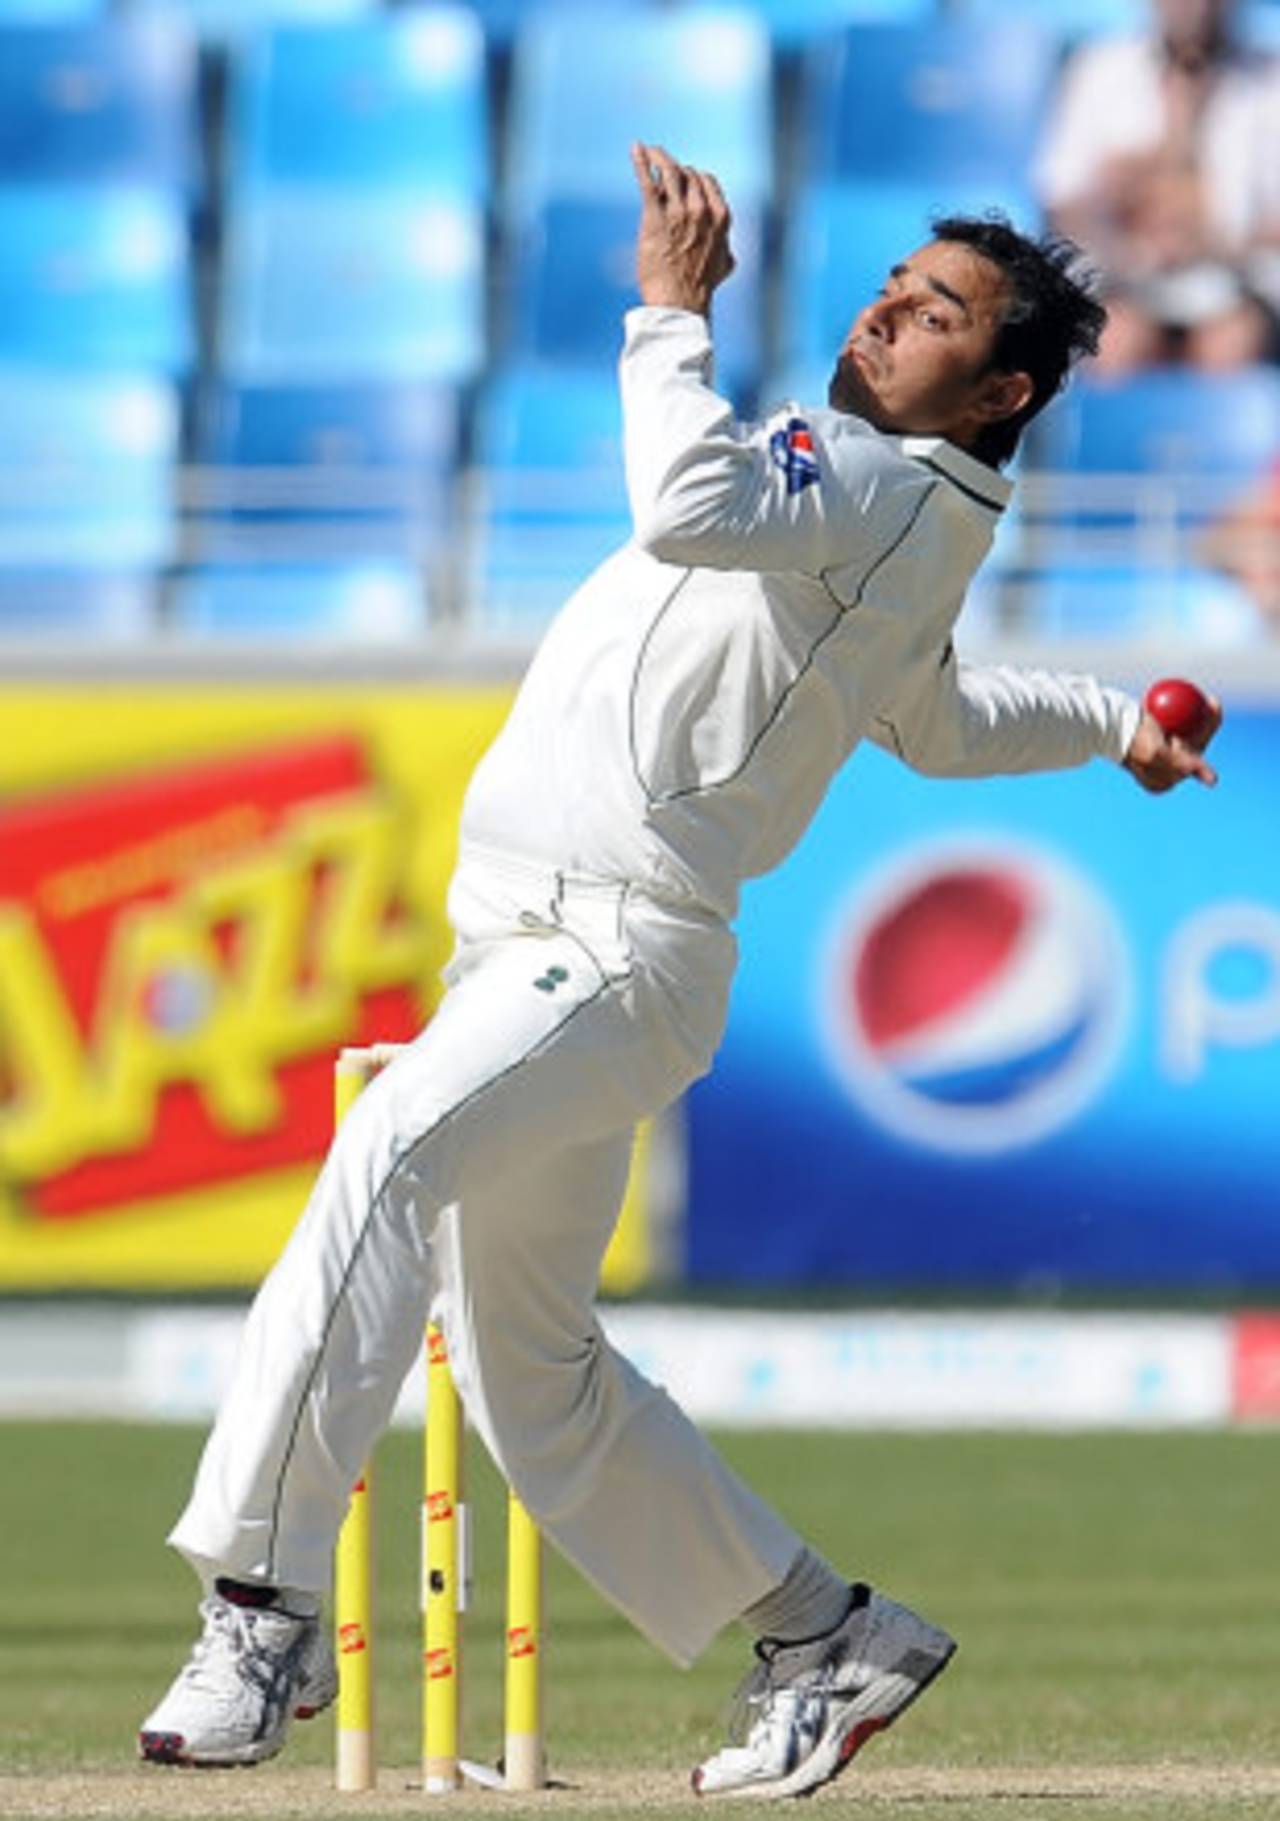 Saeed Ajmal's arm straightens, on average, by eight degrees when bowling - well within the ICC limit&nbsp;&nbsp;&bull;&nbsp;&nbsp;Getty Images